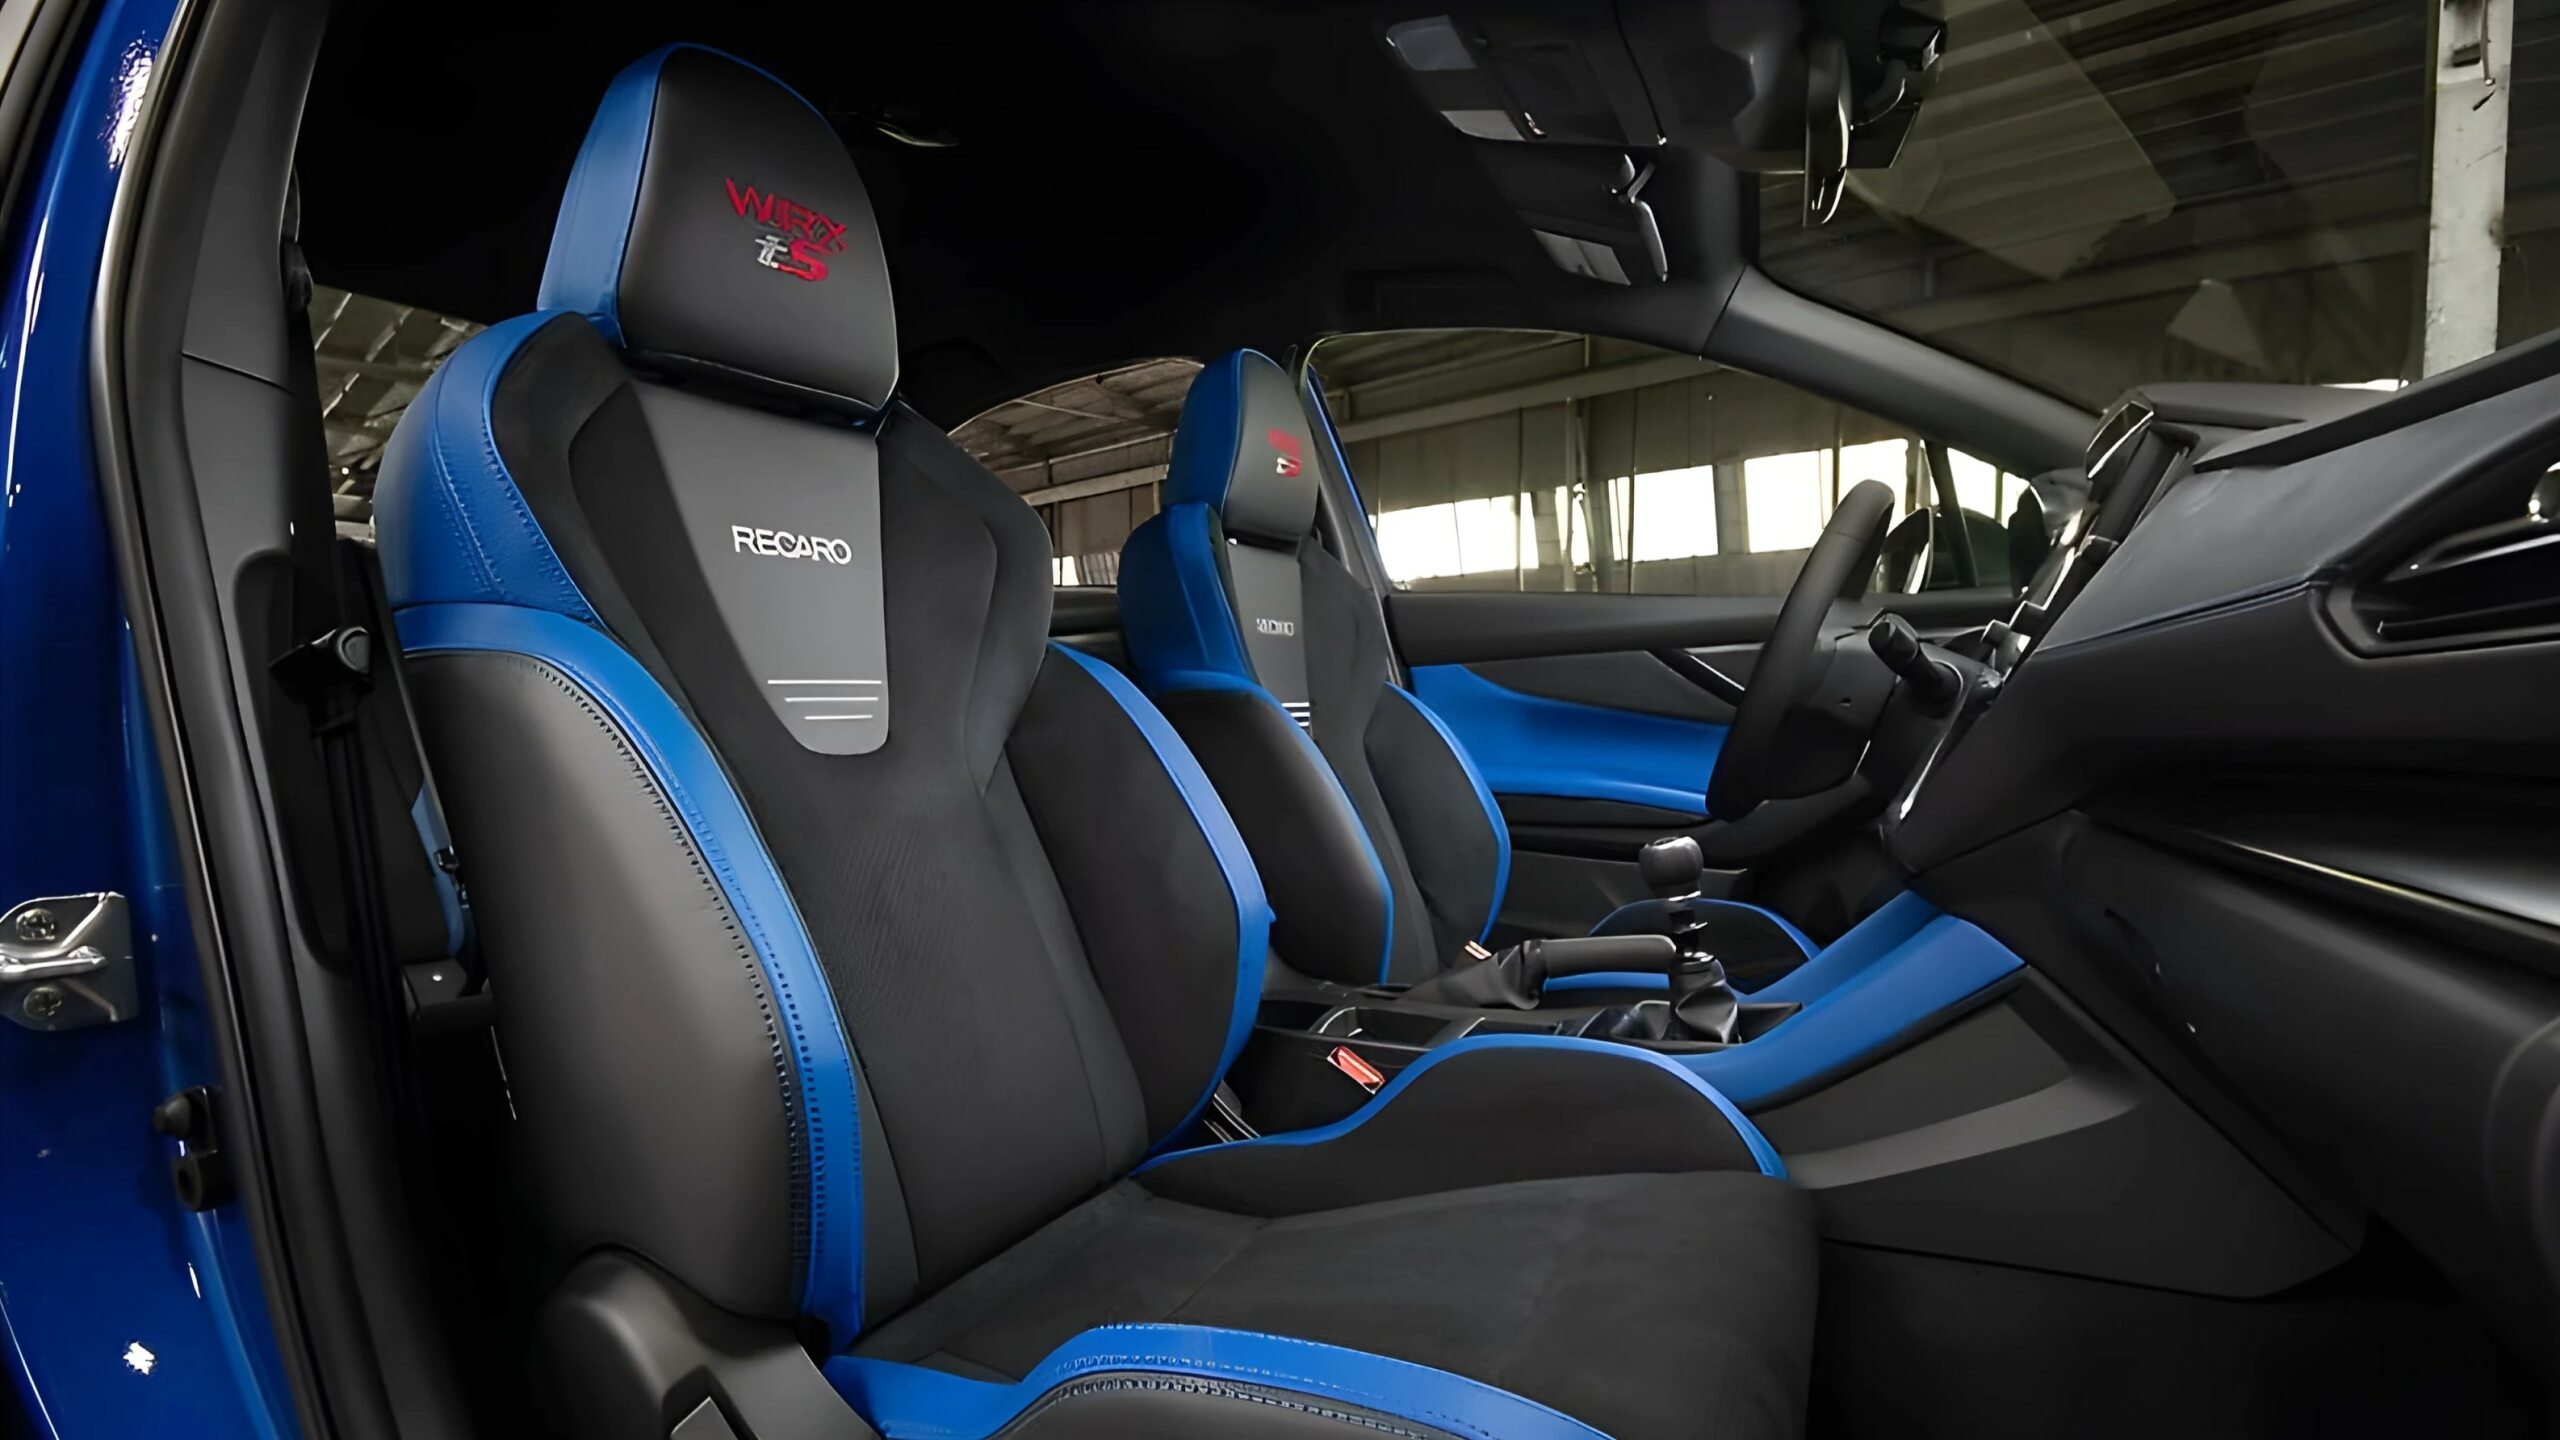 The Blue Accented Seat Bolsters, Steering Wheel And Door Panels Of The 2025 Subaru WRX tS (Subaru)